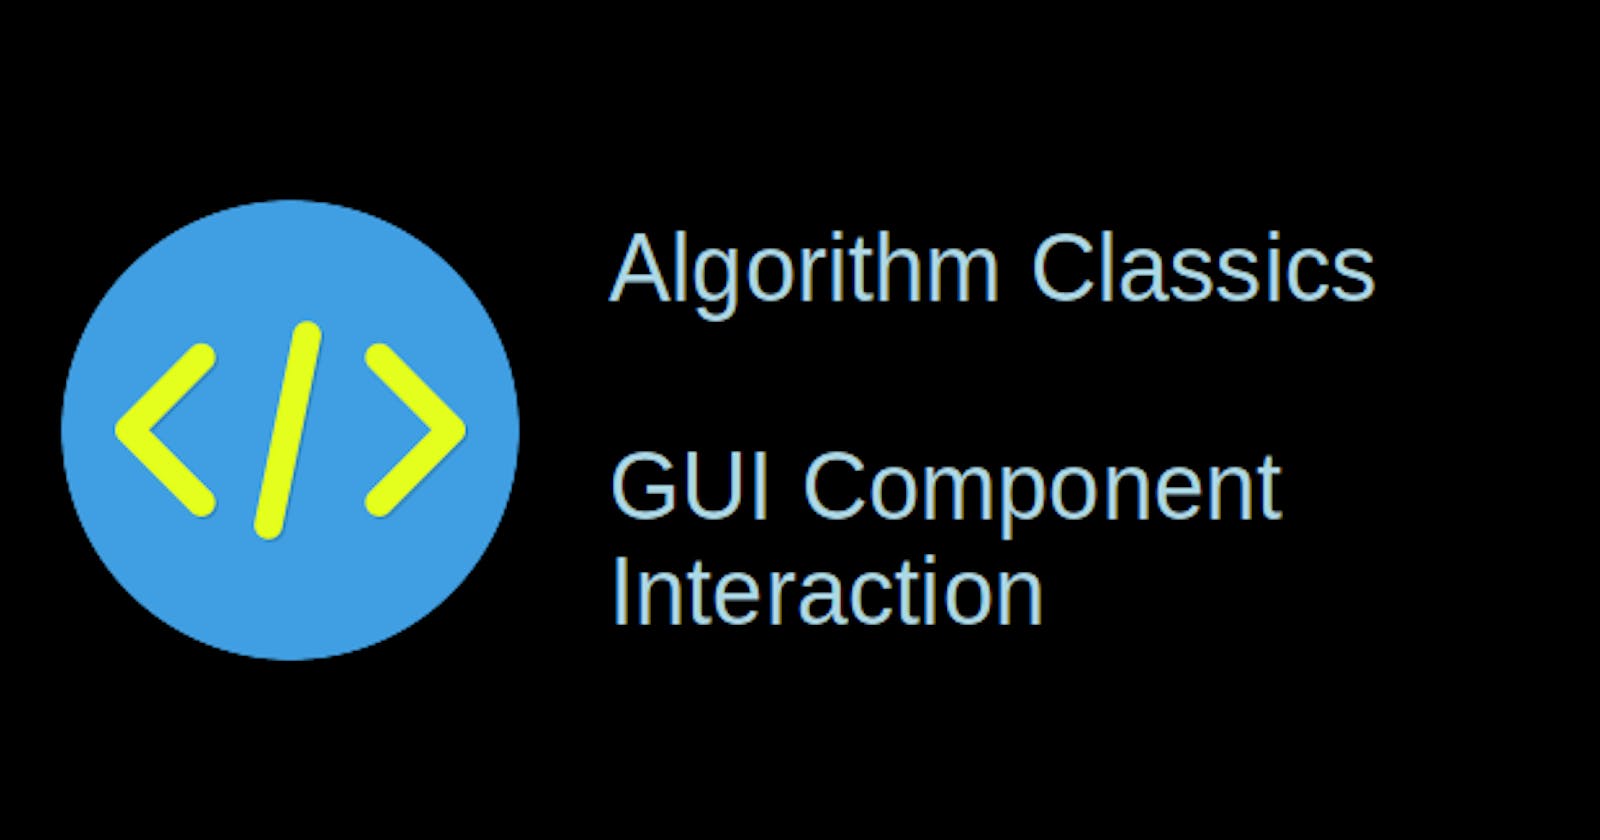 Web Apps: GUI Component Interaction